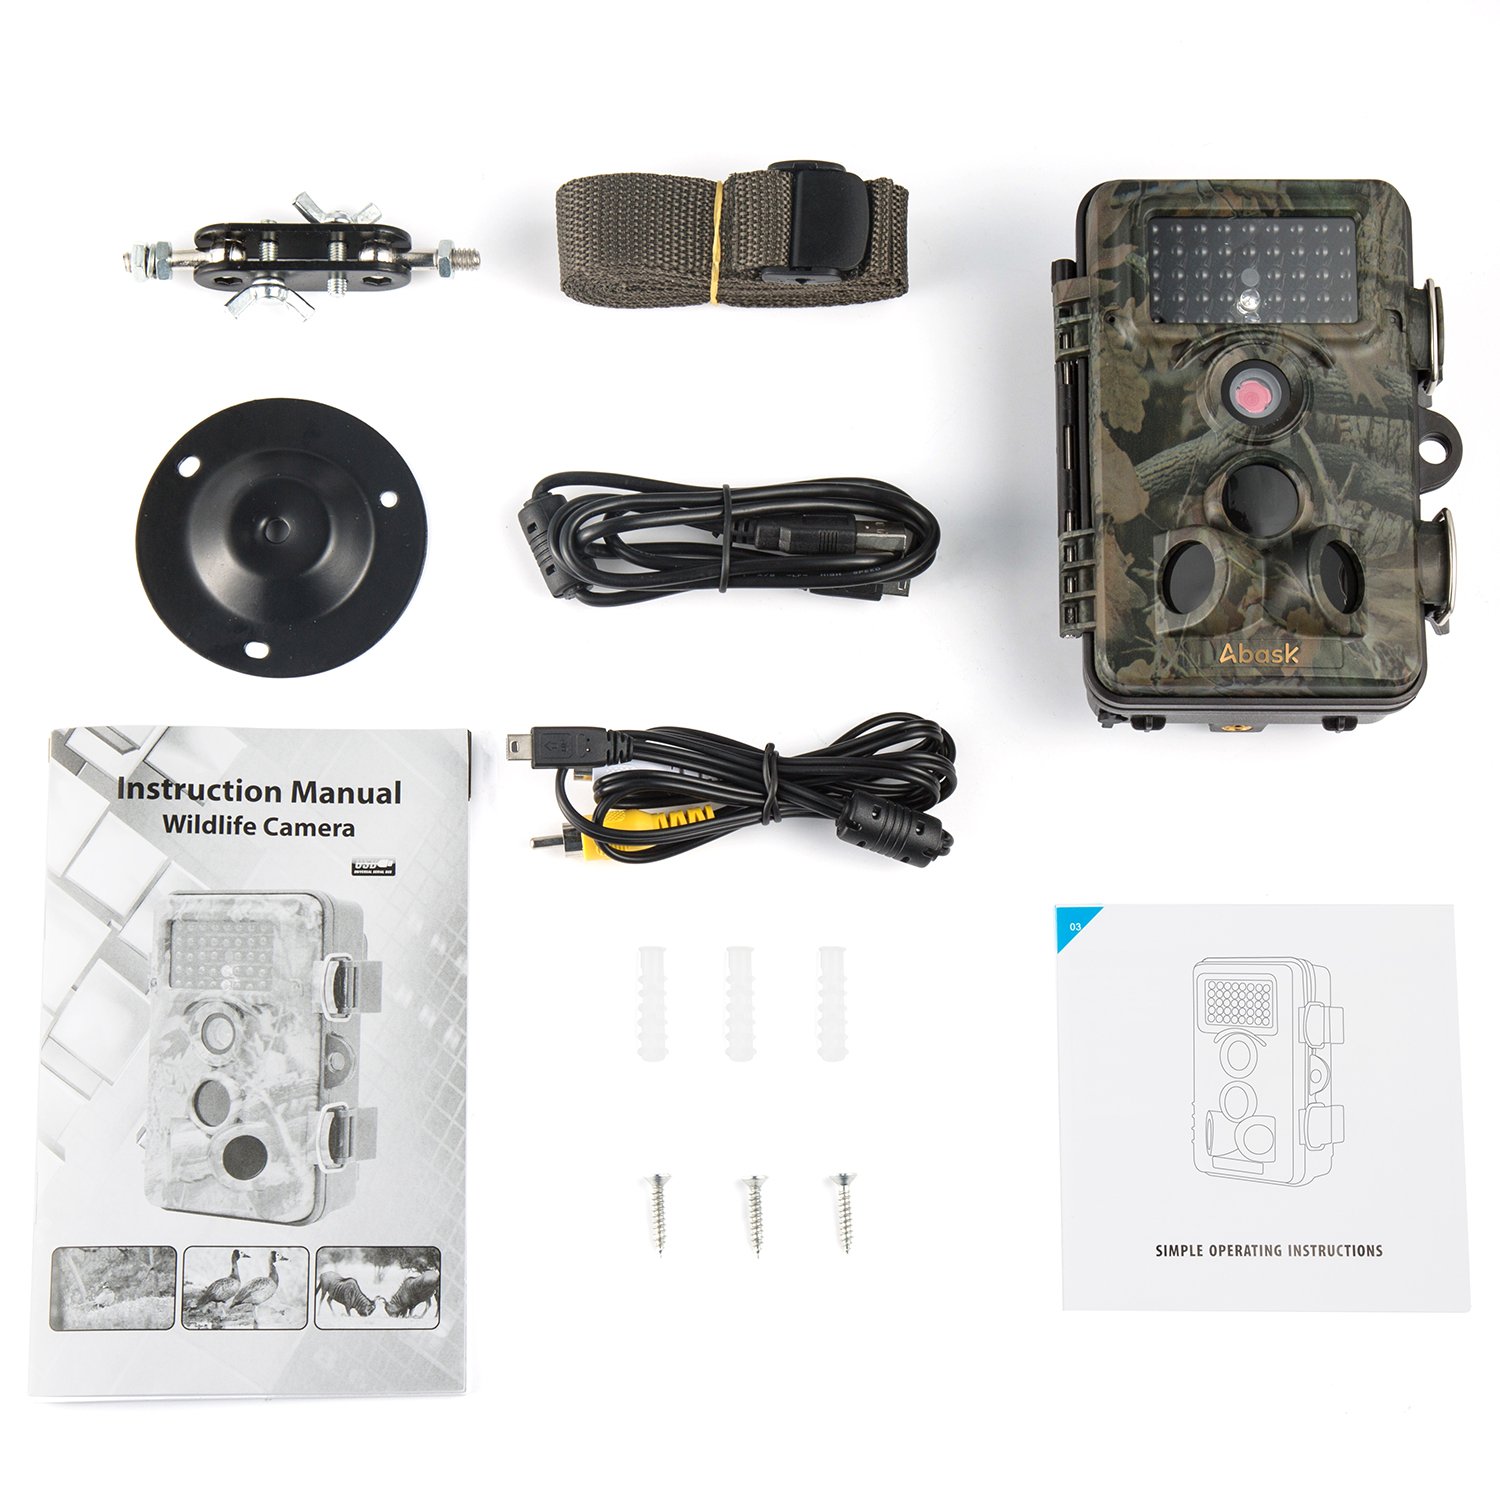 abask trail camera instructions